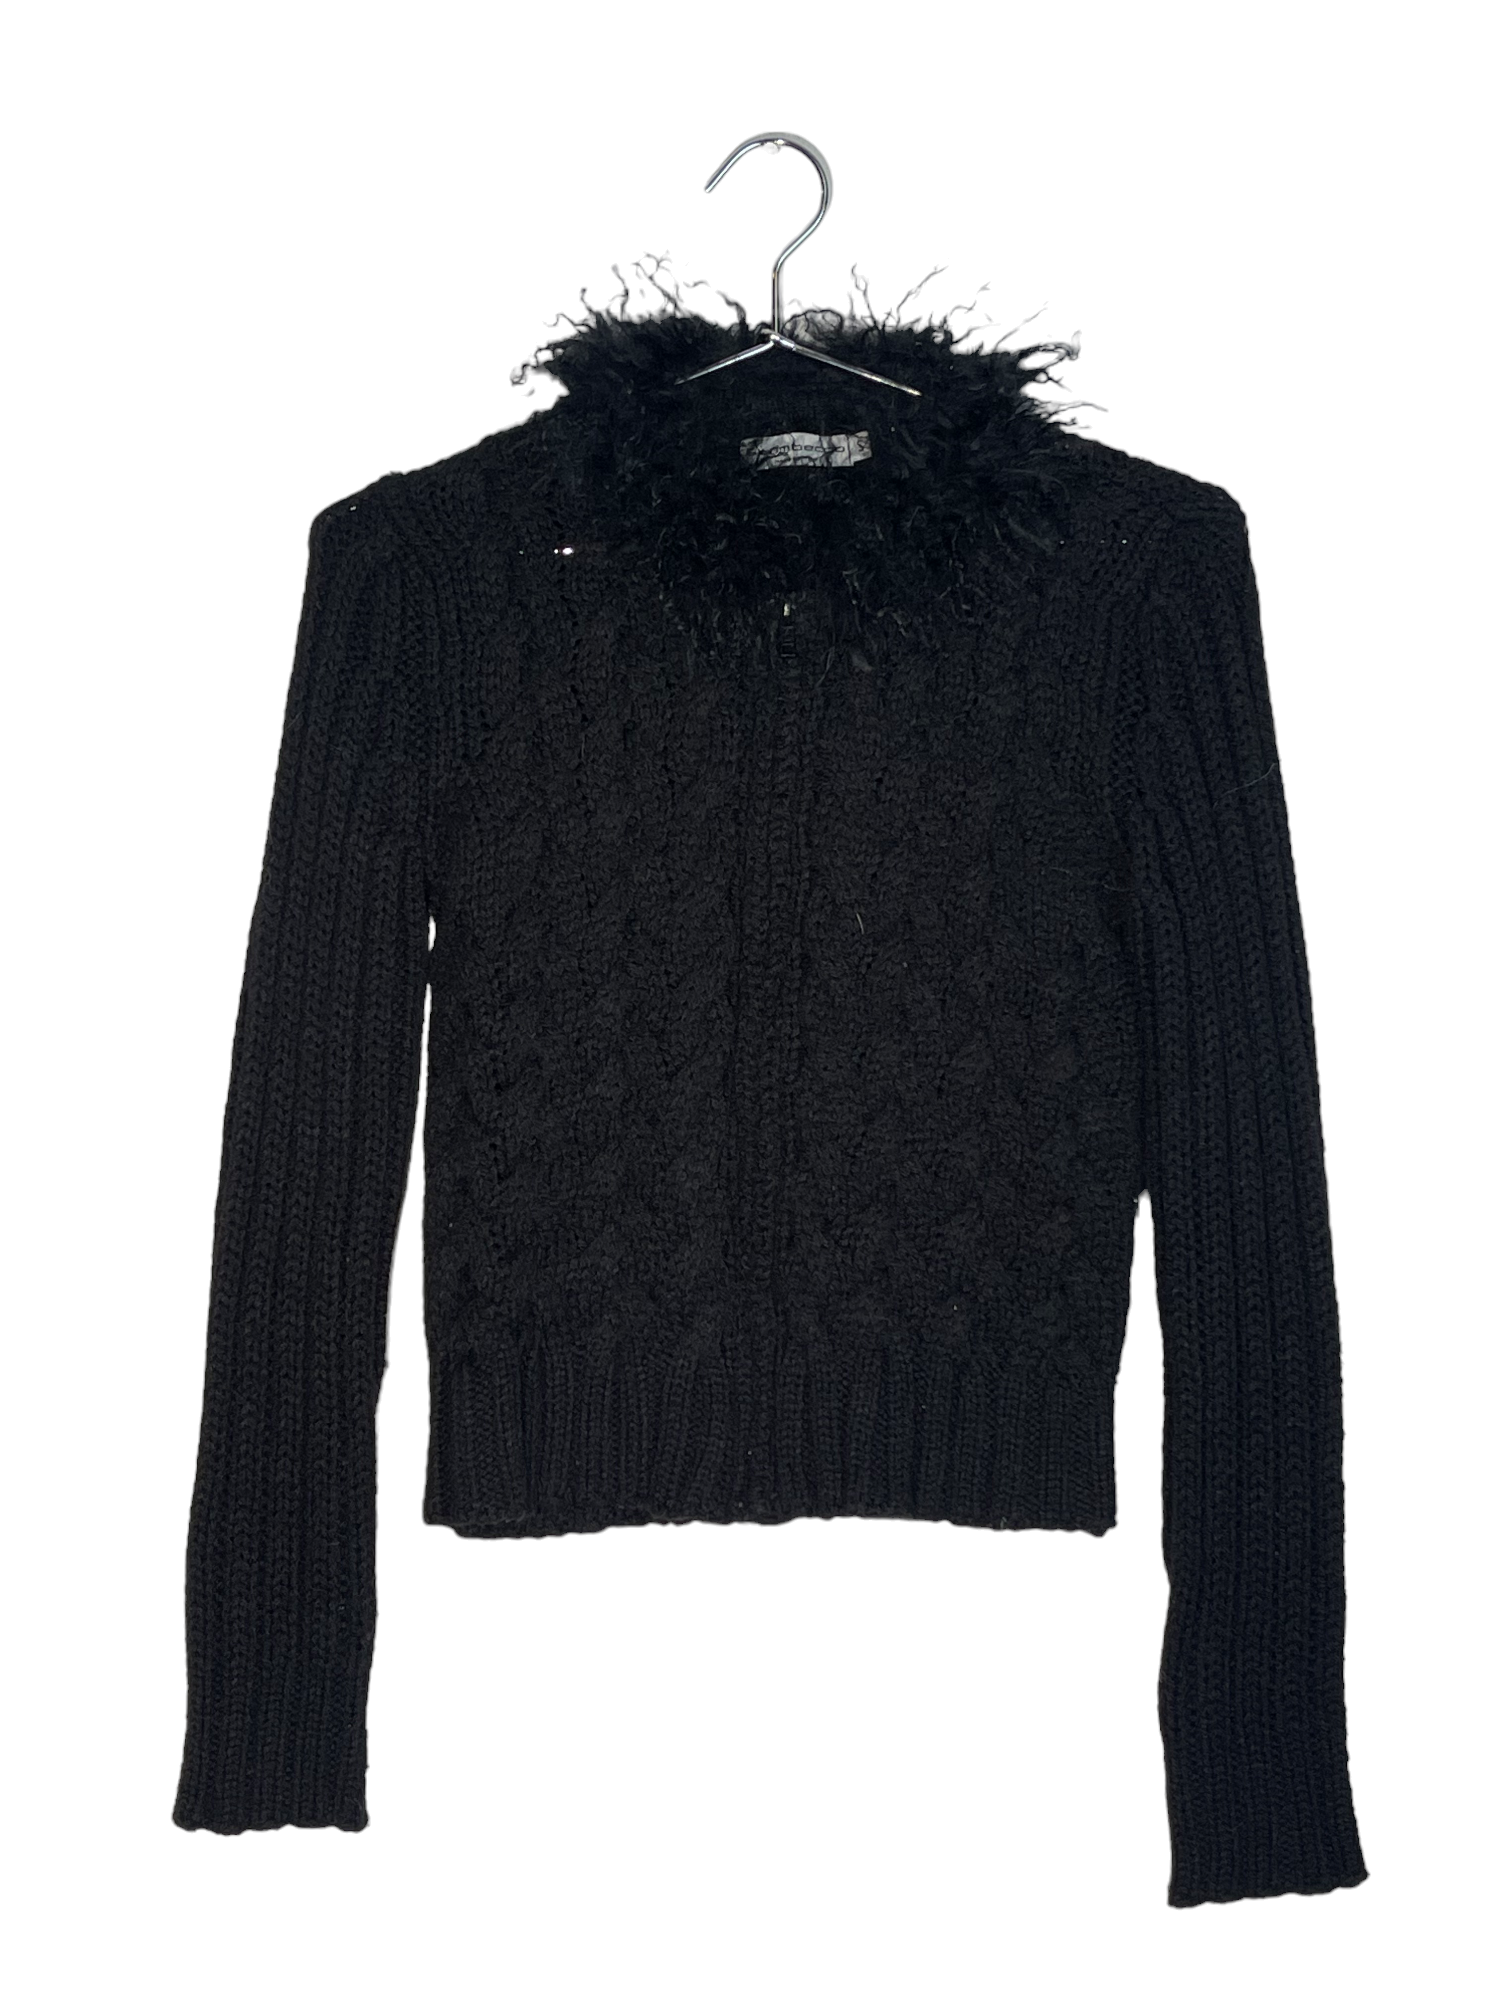 Black Fuzz Neck Cable Knit Sweater